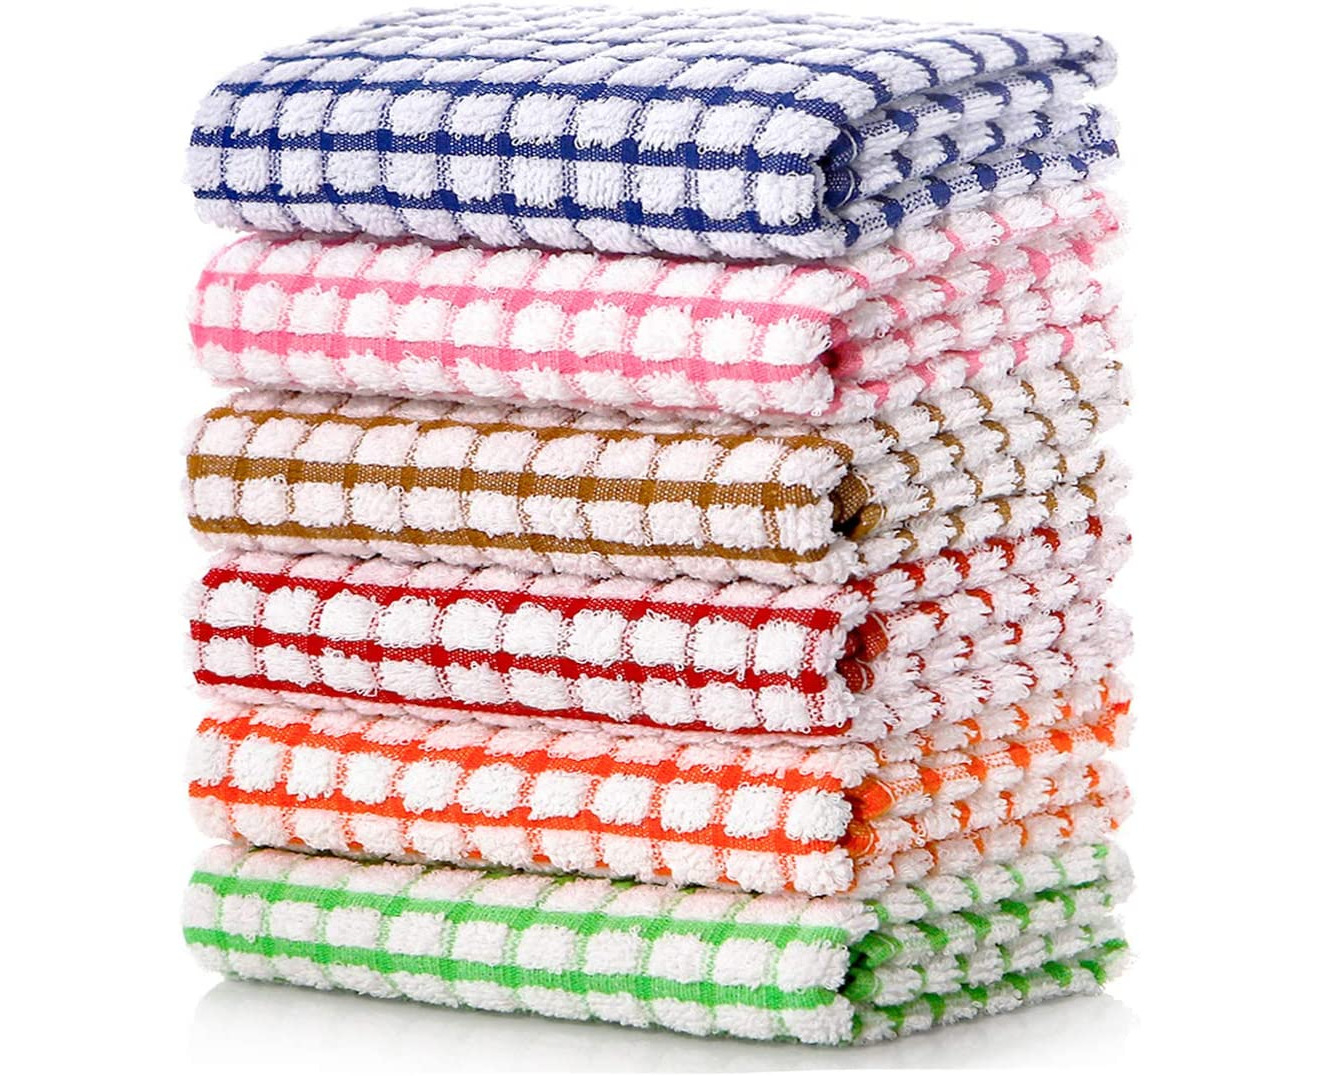 Glynniss Dishcloths Kitchen Highly Absorbent Dish Rags 100% Cotton Dish Cloths for Washing Dishes red 